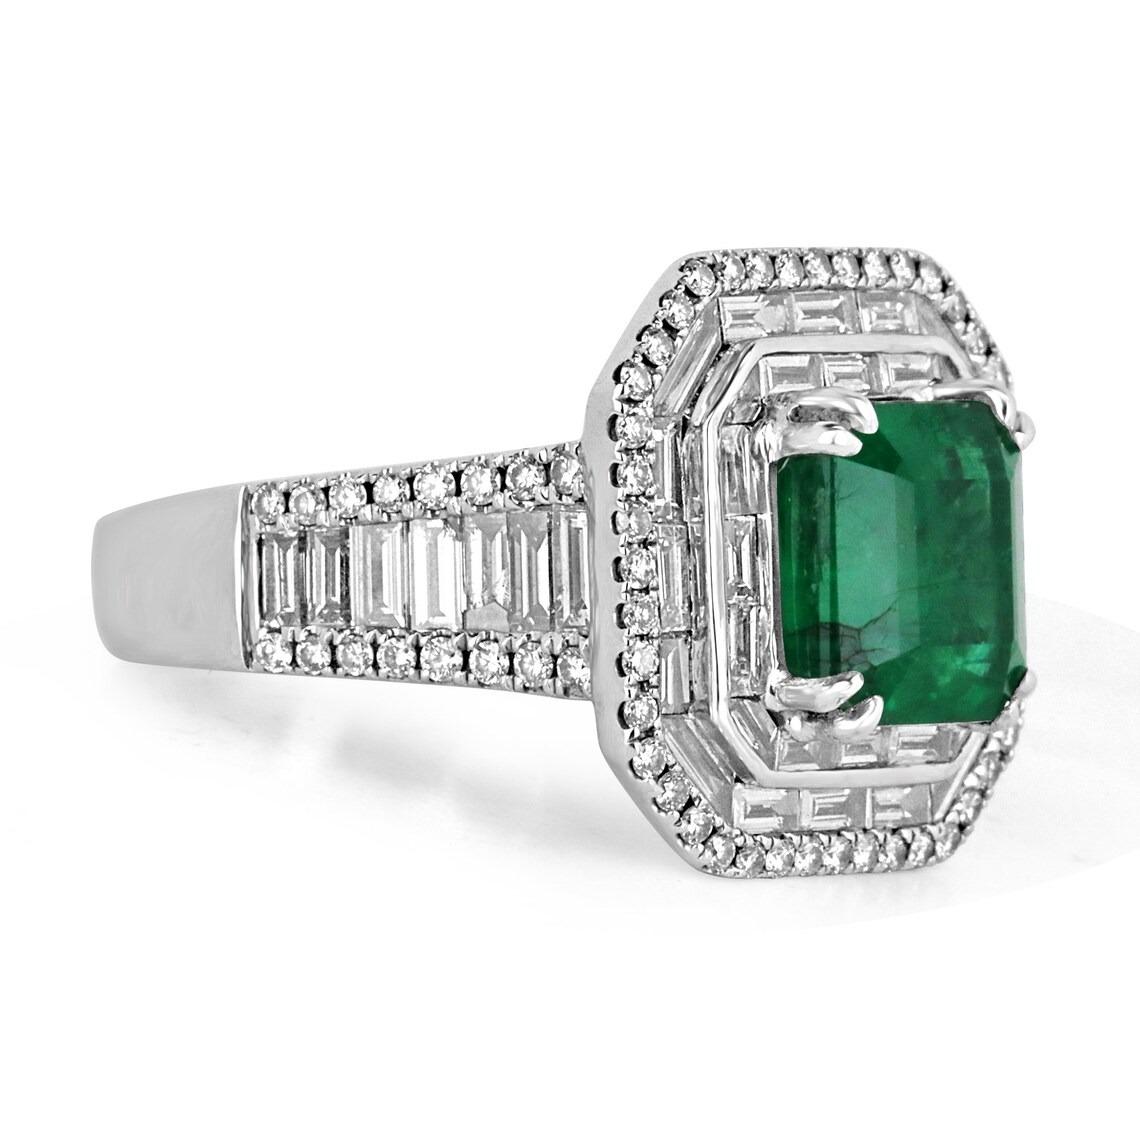 A luxurious emerald and diamond statement ring. This remarkable masterpiece features a large, fine-quality natural Asscher cut emerald from the origin of Zambia. The gemstone showcases a rich dark emerald-green color, excellent-very good clarity,